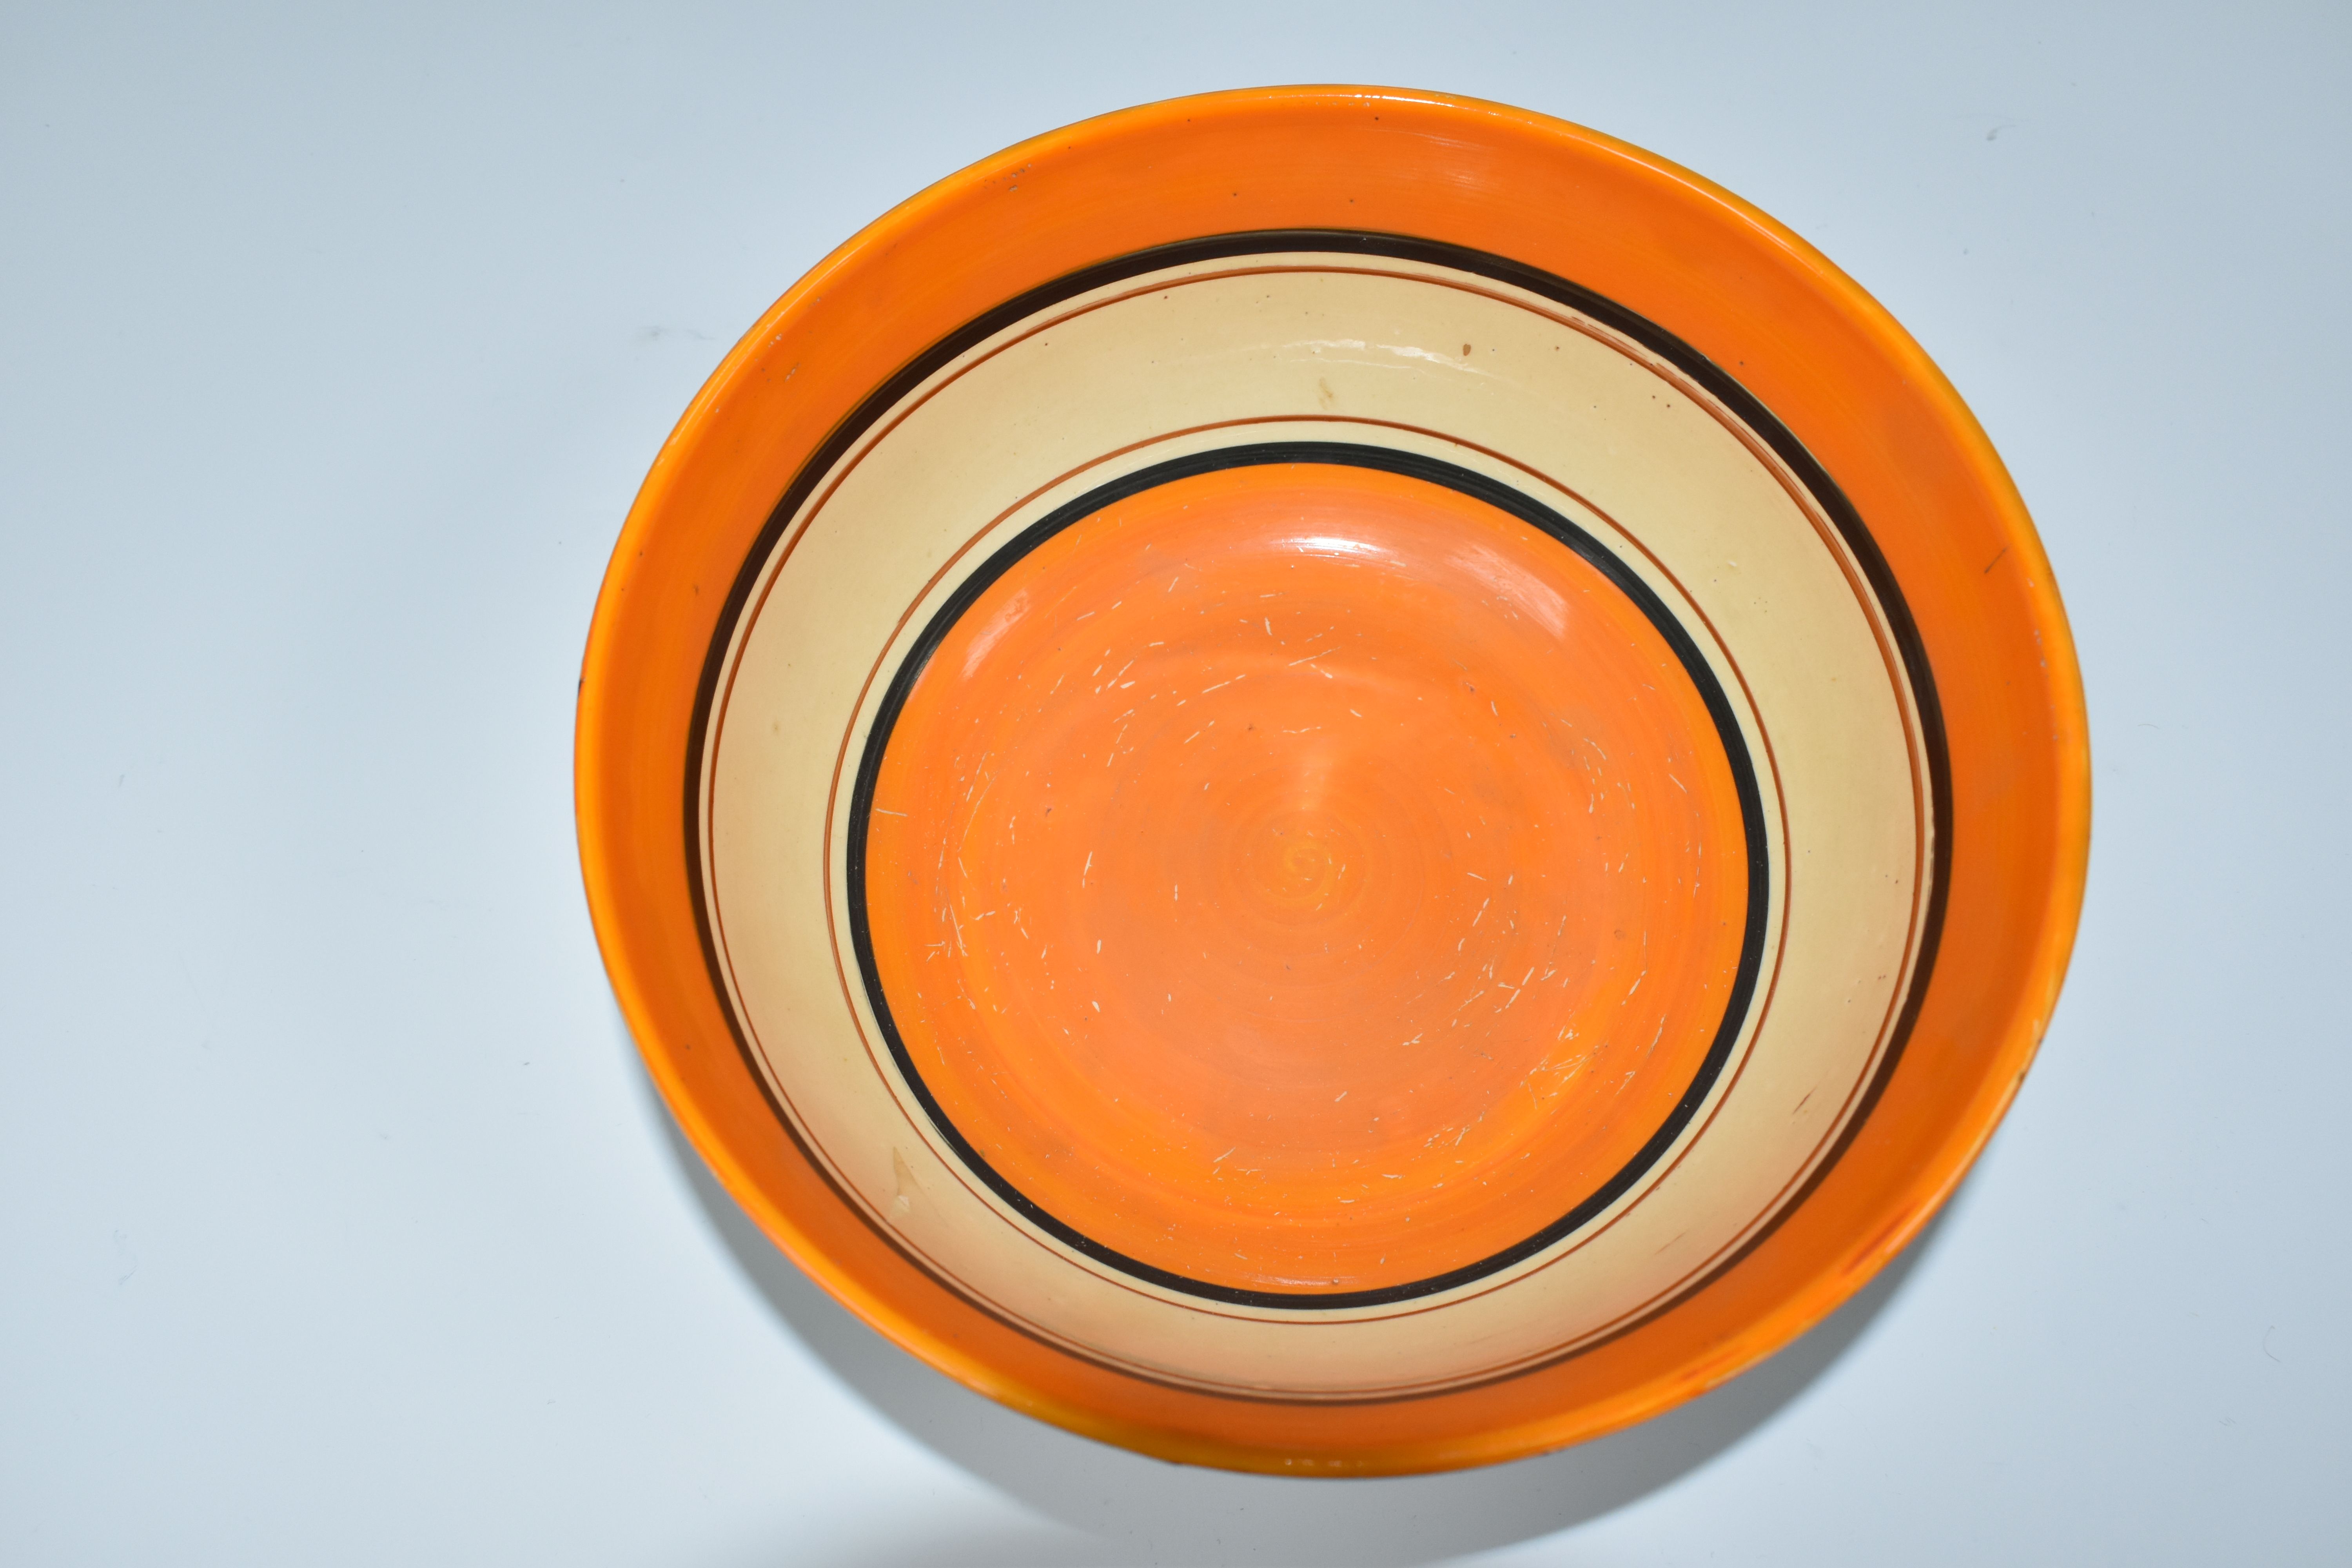 A CLARICE CLIFF FANTASQUE 'ORANGE HOUSE' PATTERN BOWL, painted with two orange houses in a fantasy - Image 4 of 5